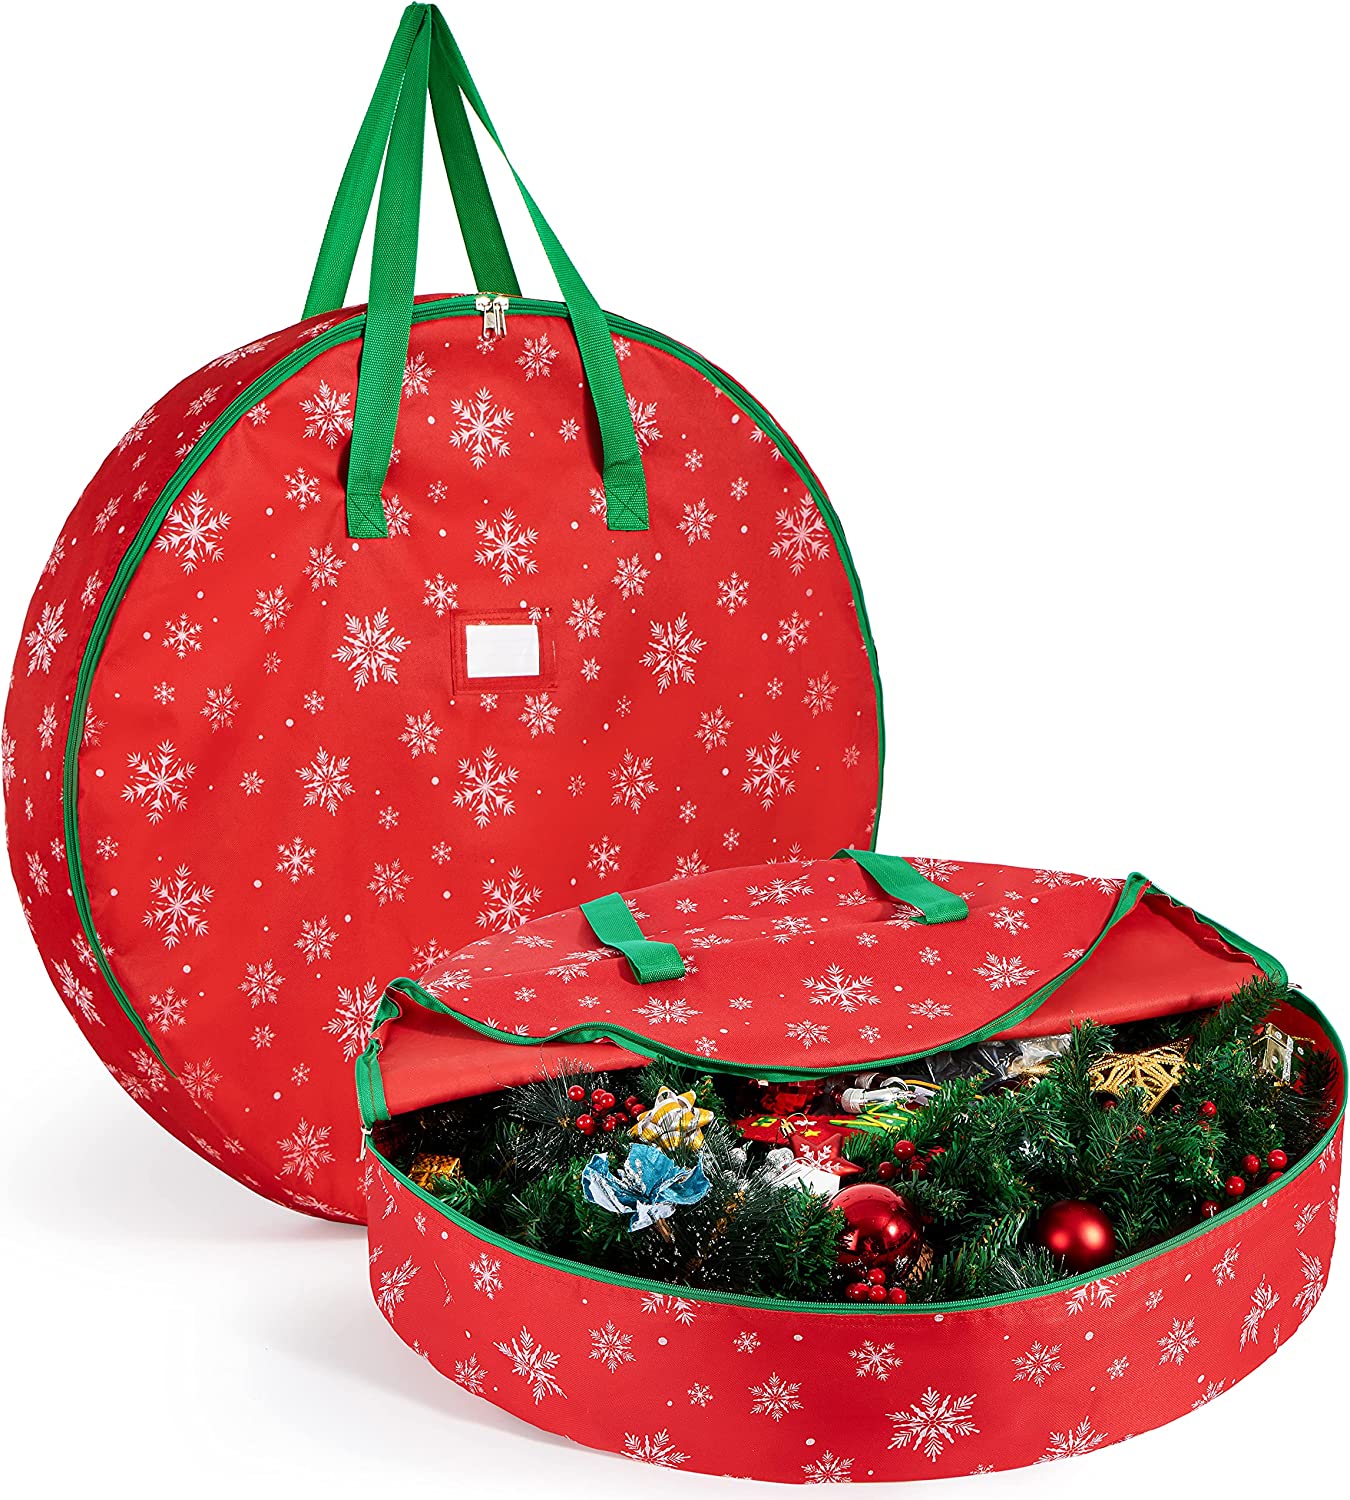 Snowflake Patterned Christmas Wreath Oxford Storage Bag (Red)